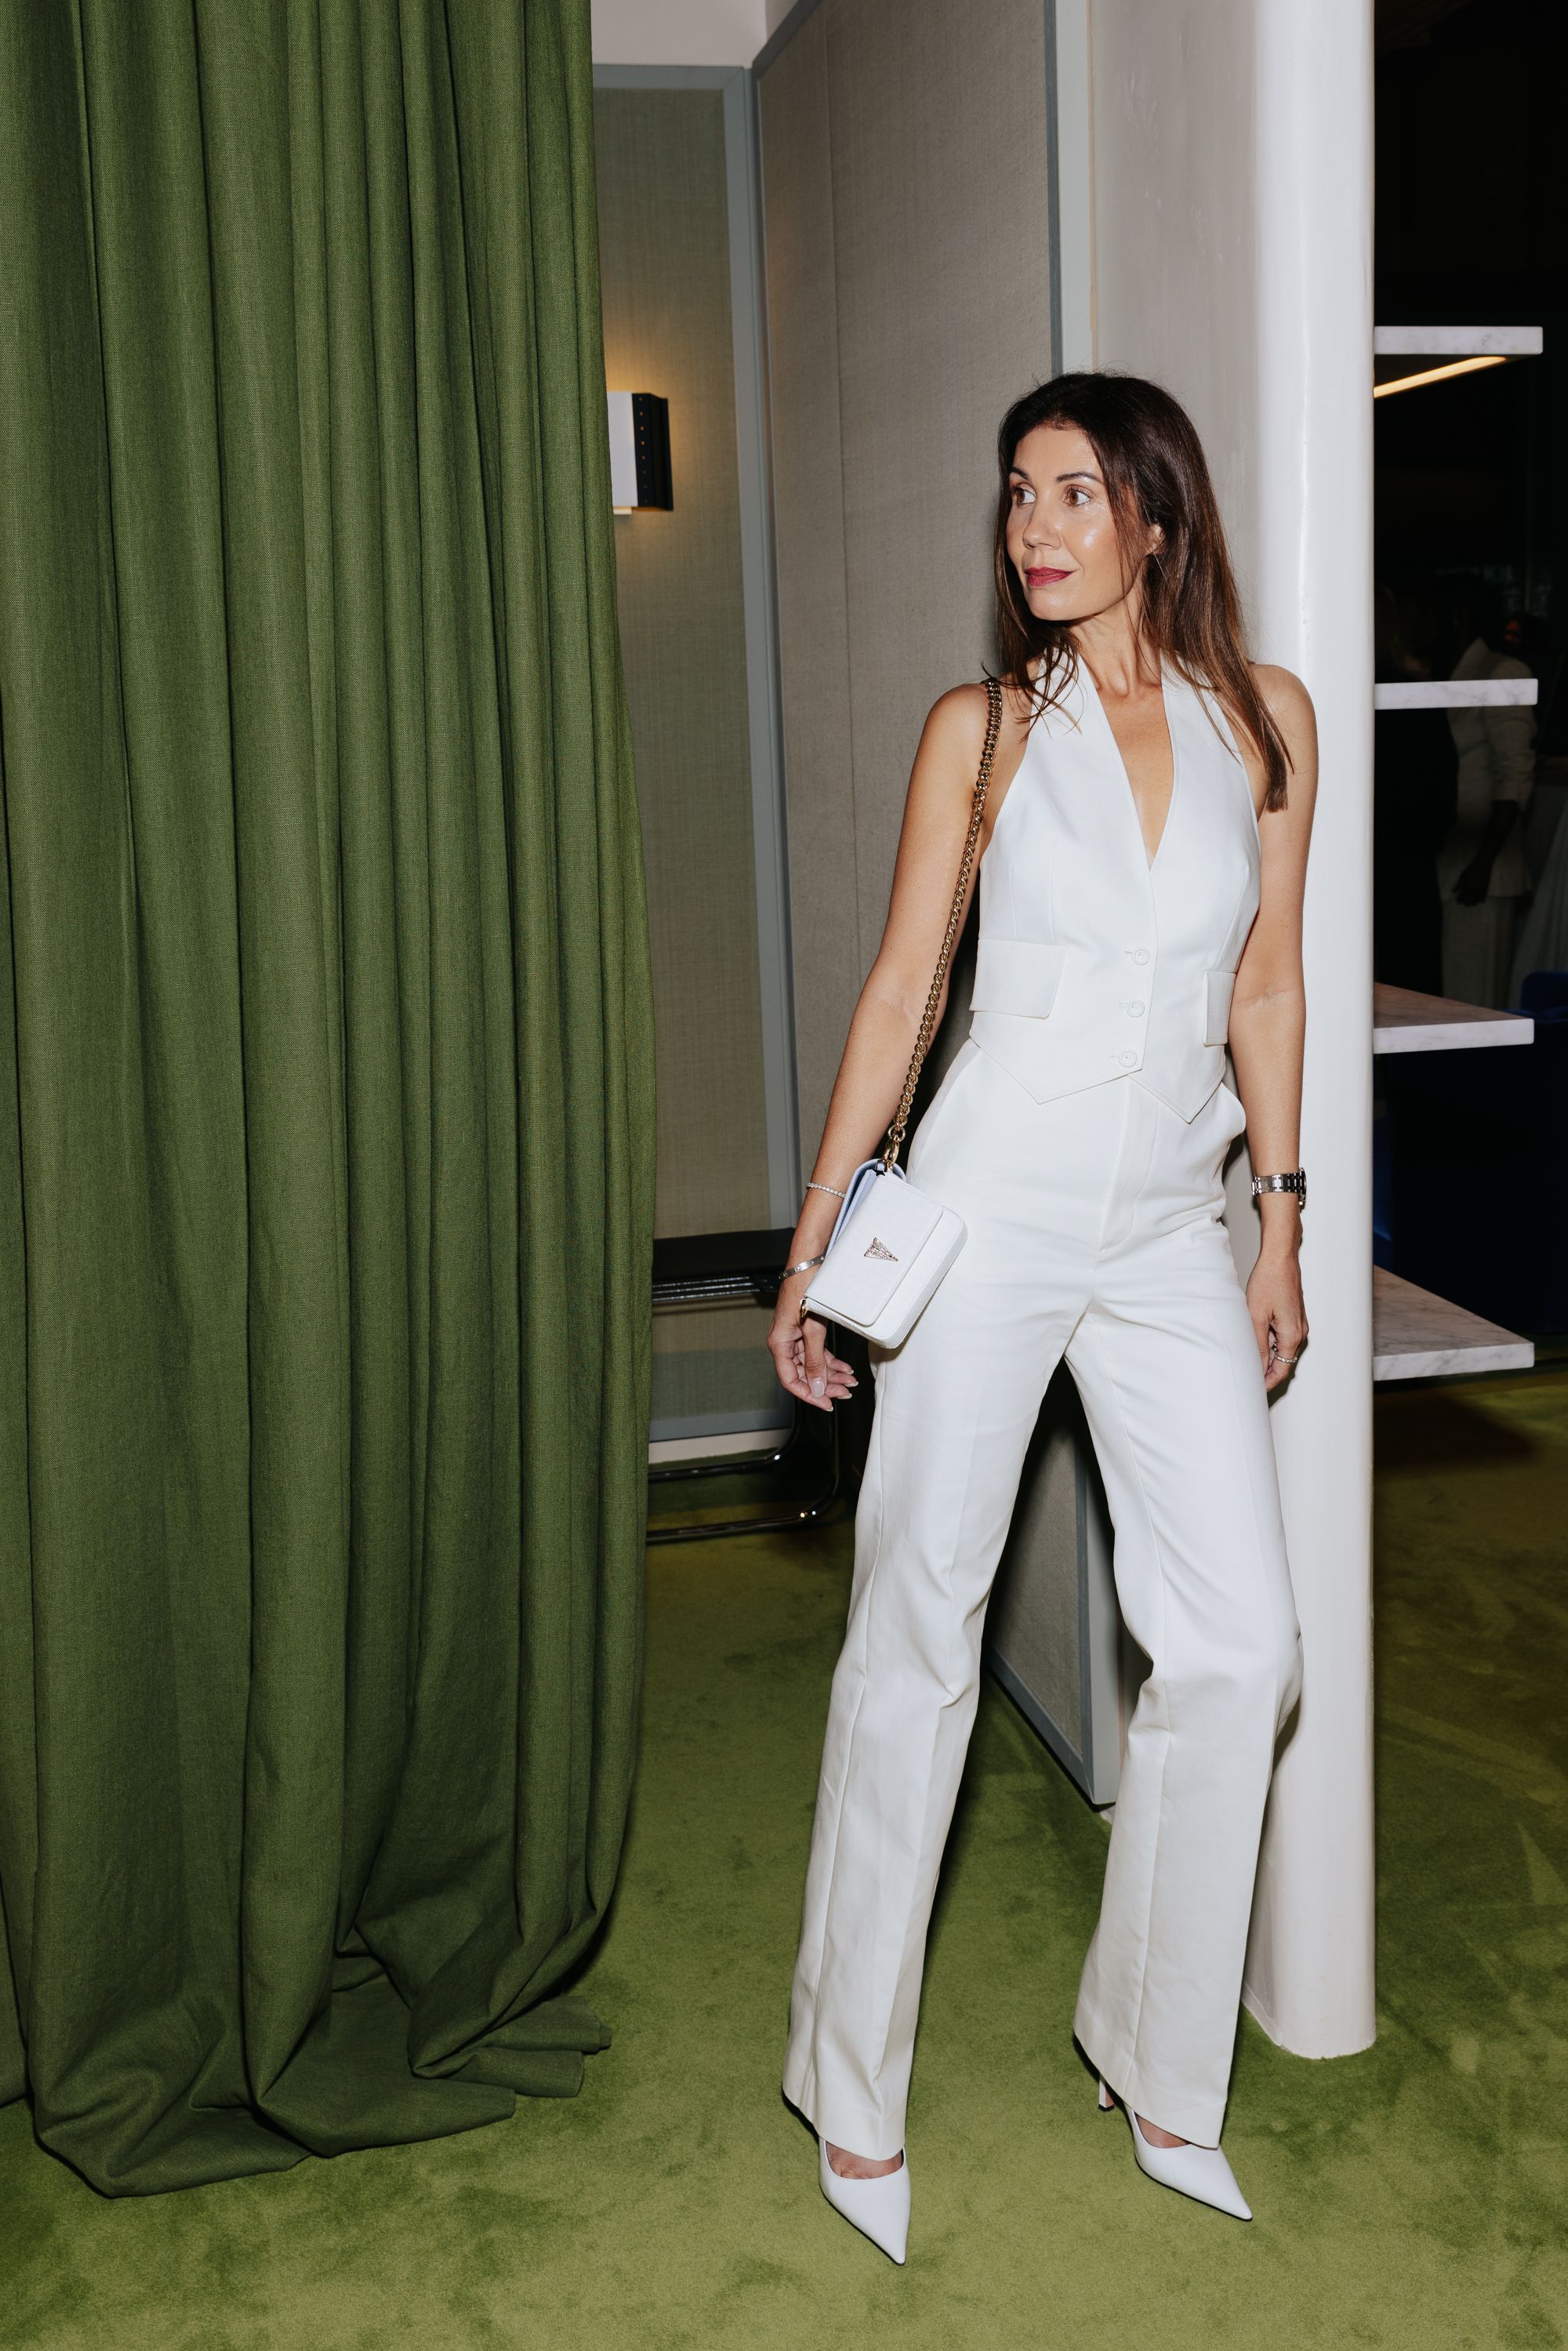 Woman standing next to fitting room wearing white vest and trousers